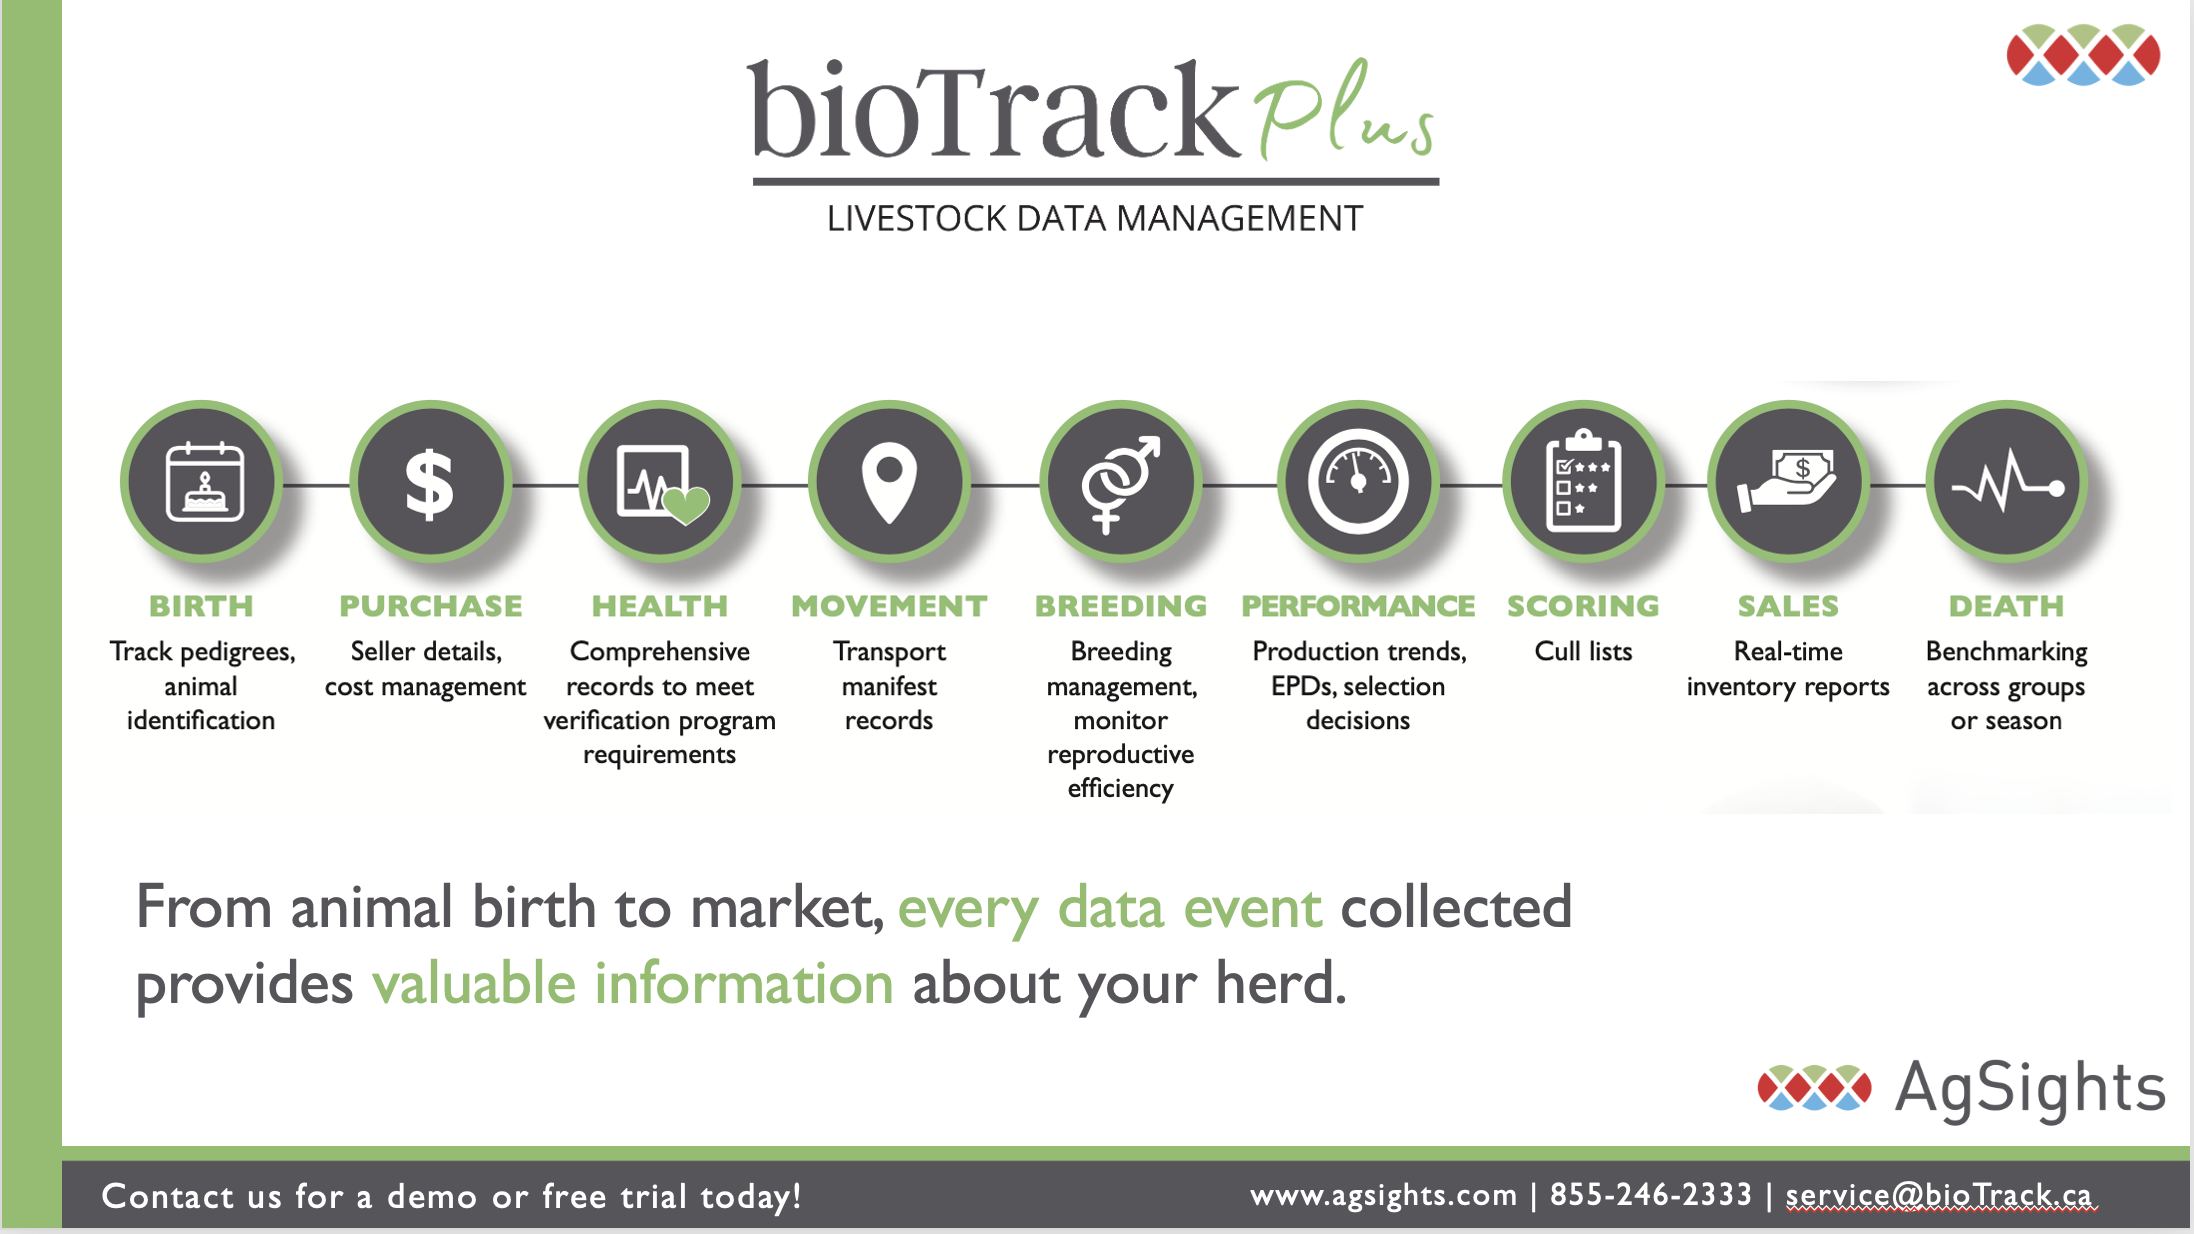 bioTrack Plus features an easy to use software to track records on your animals from birth through to sale or death.